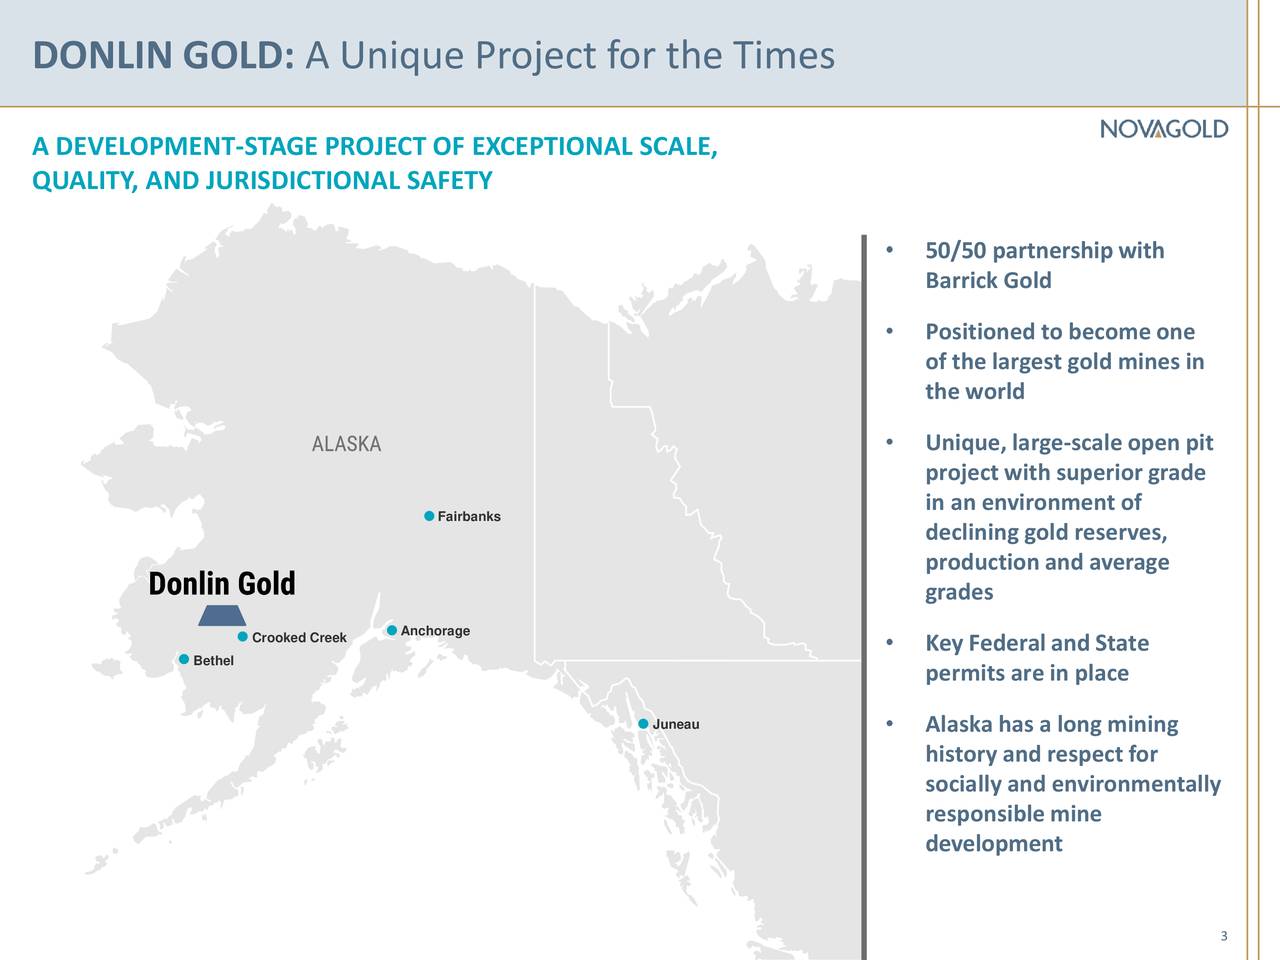 DONLIN GOLD: A Unique Project for the Times